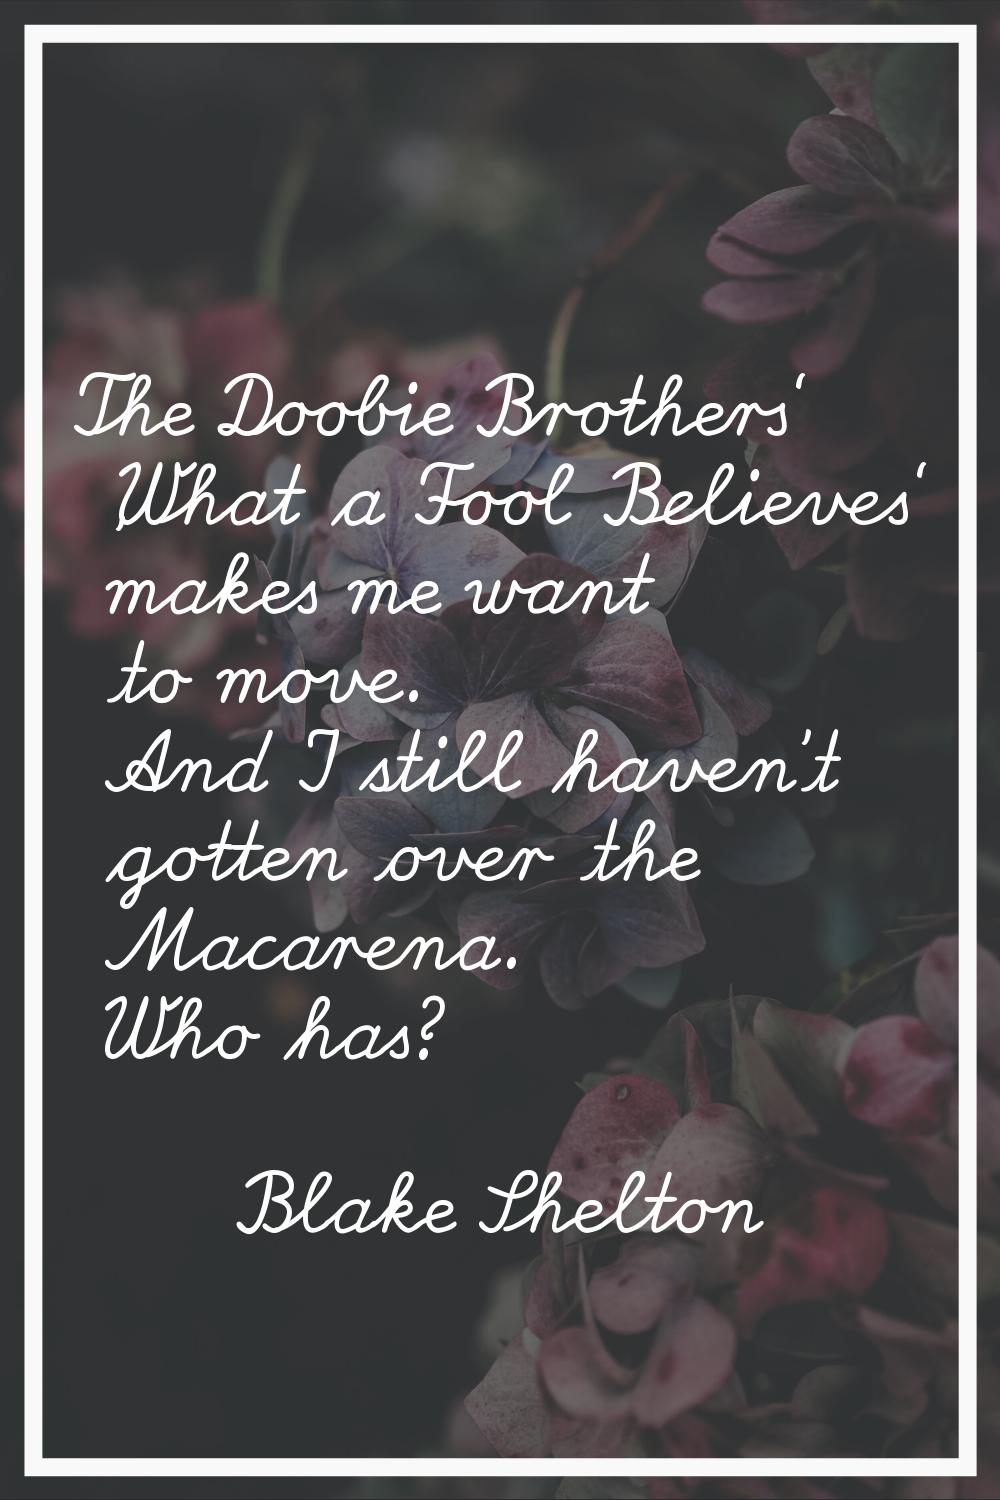 The Doobie Brothers' 'What a Fool Believes' makes me want to move. And I still haven't gotten over 